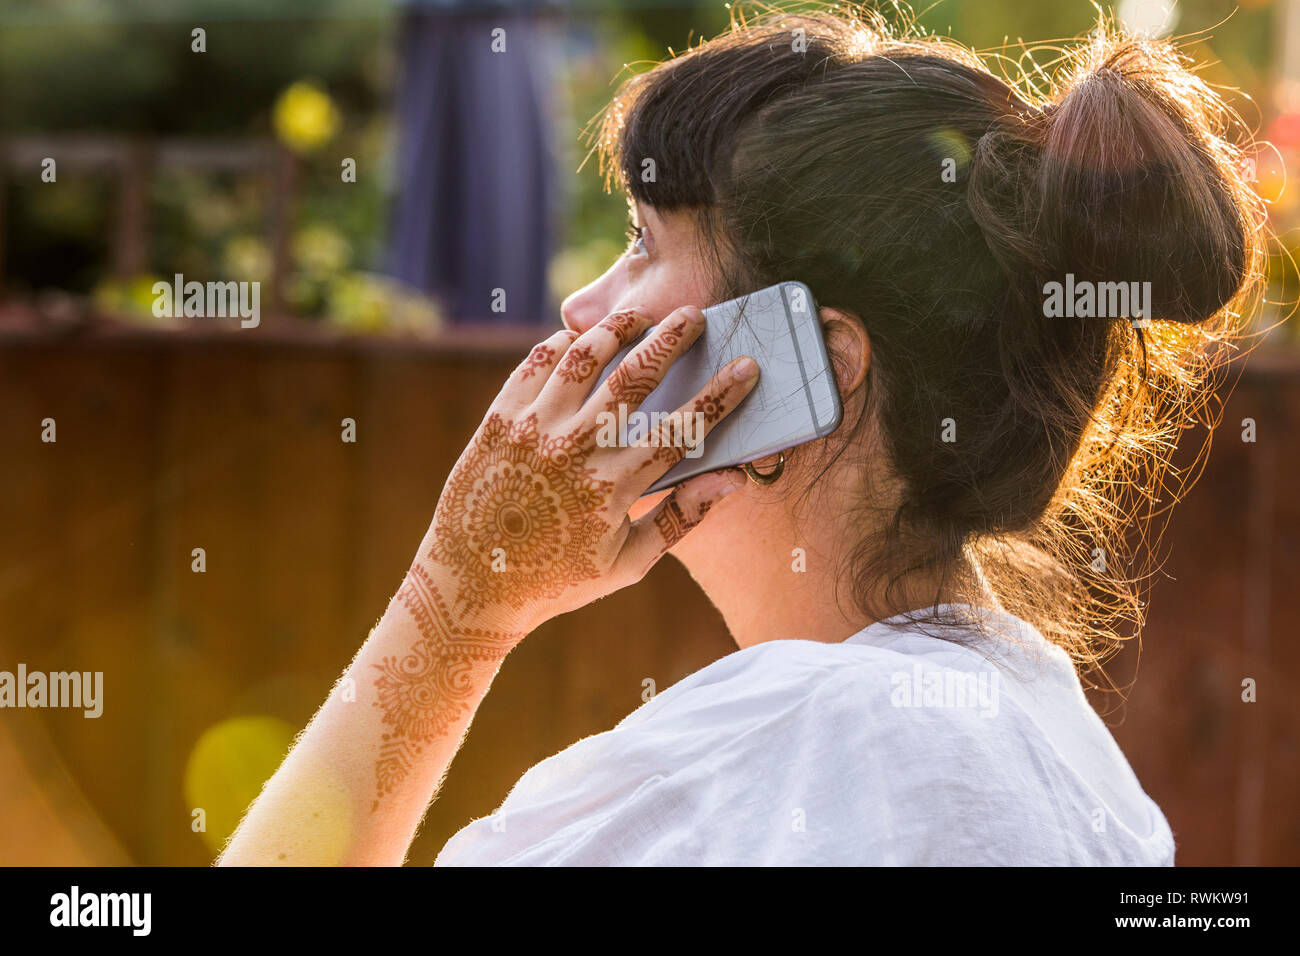 Woman with henna tattoo on hand using smartphone Stock Photo